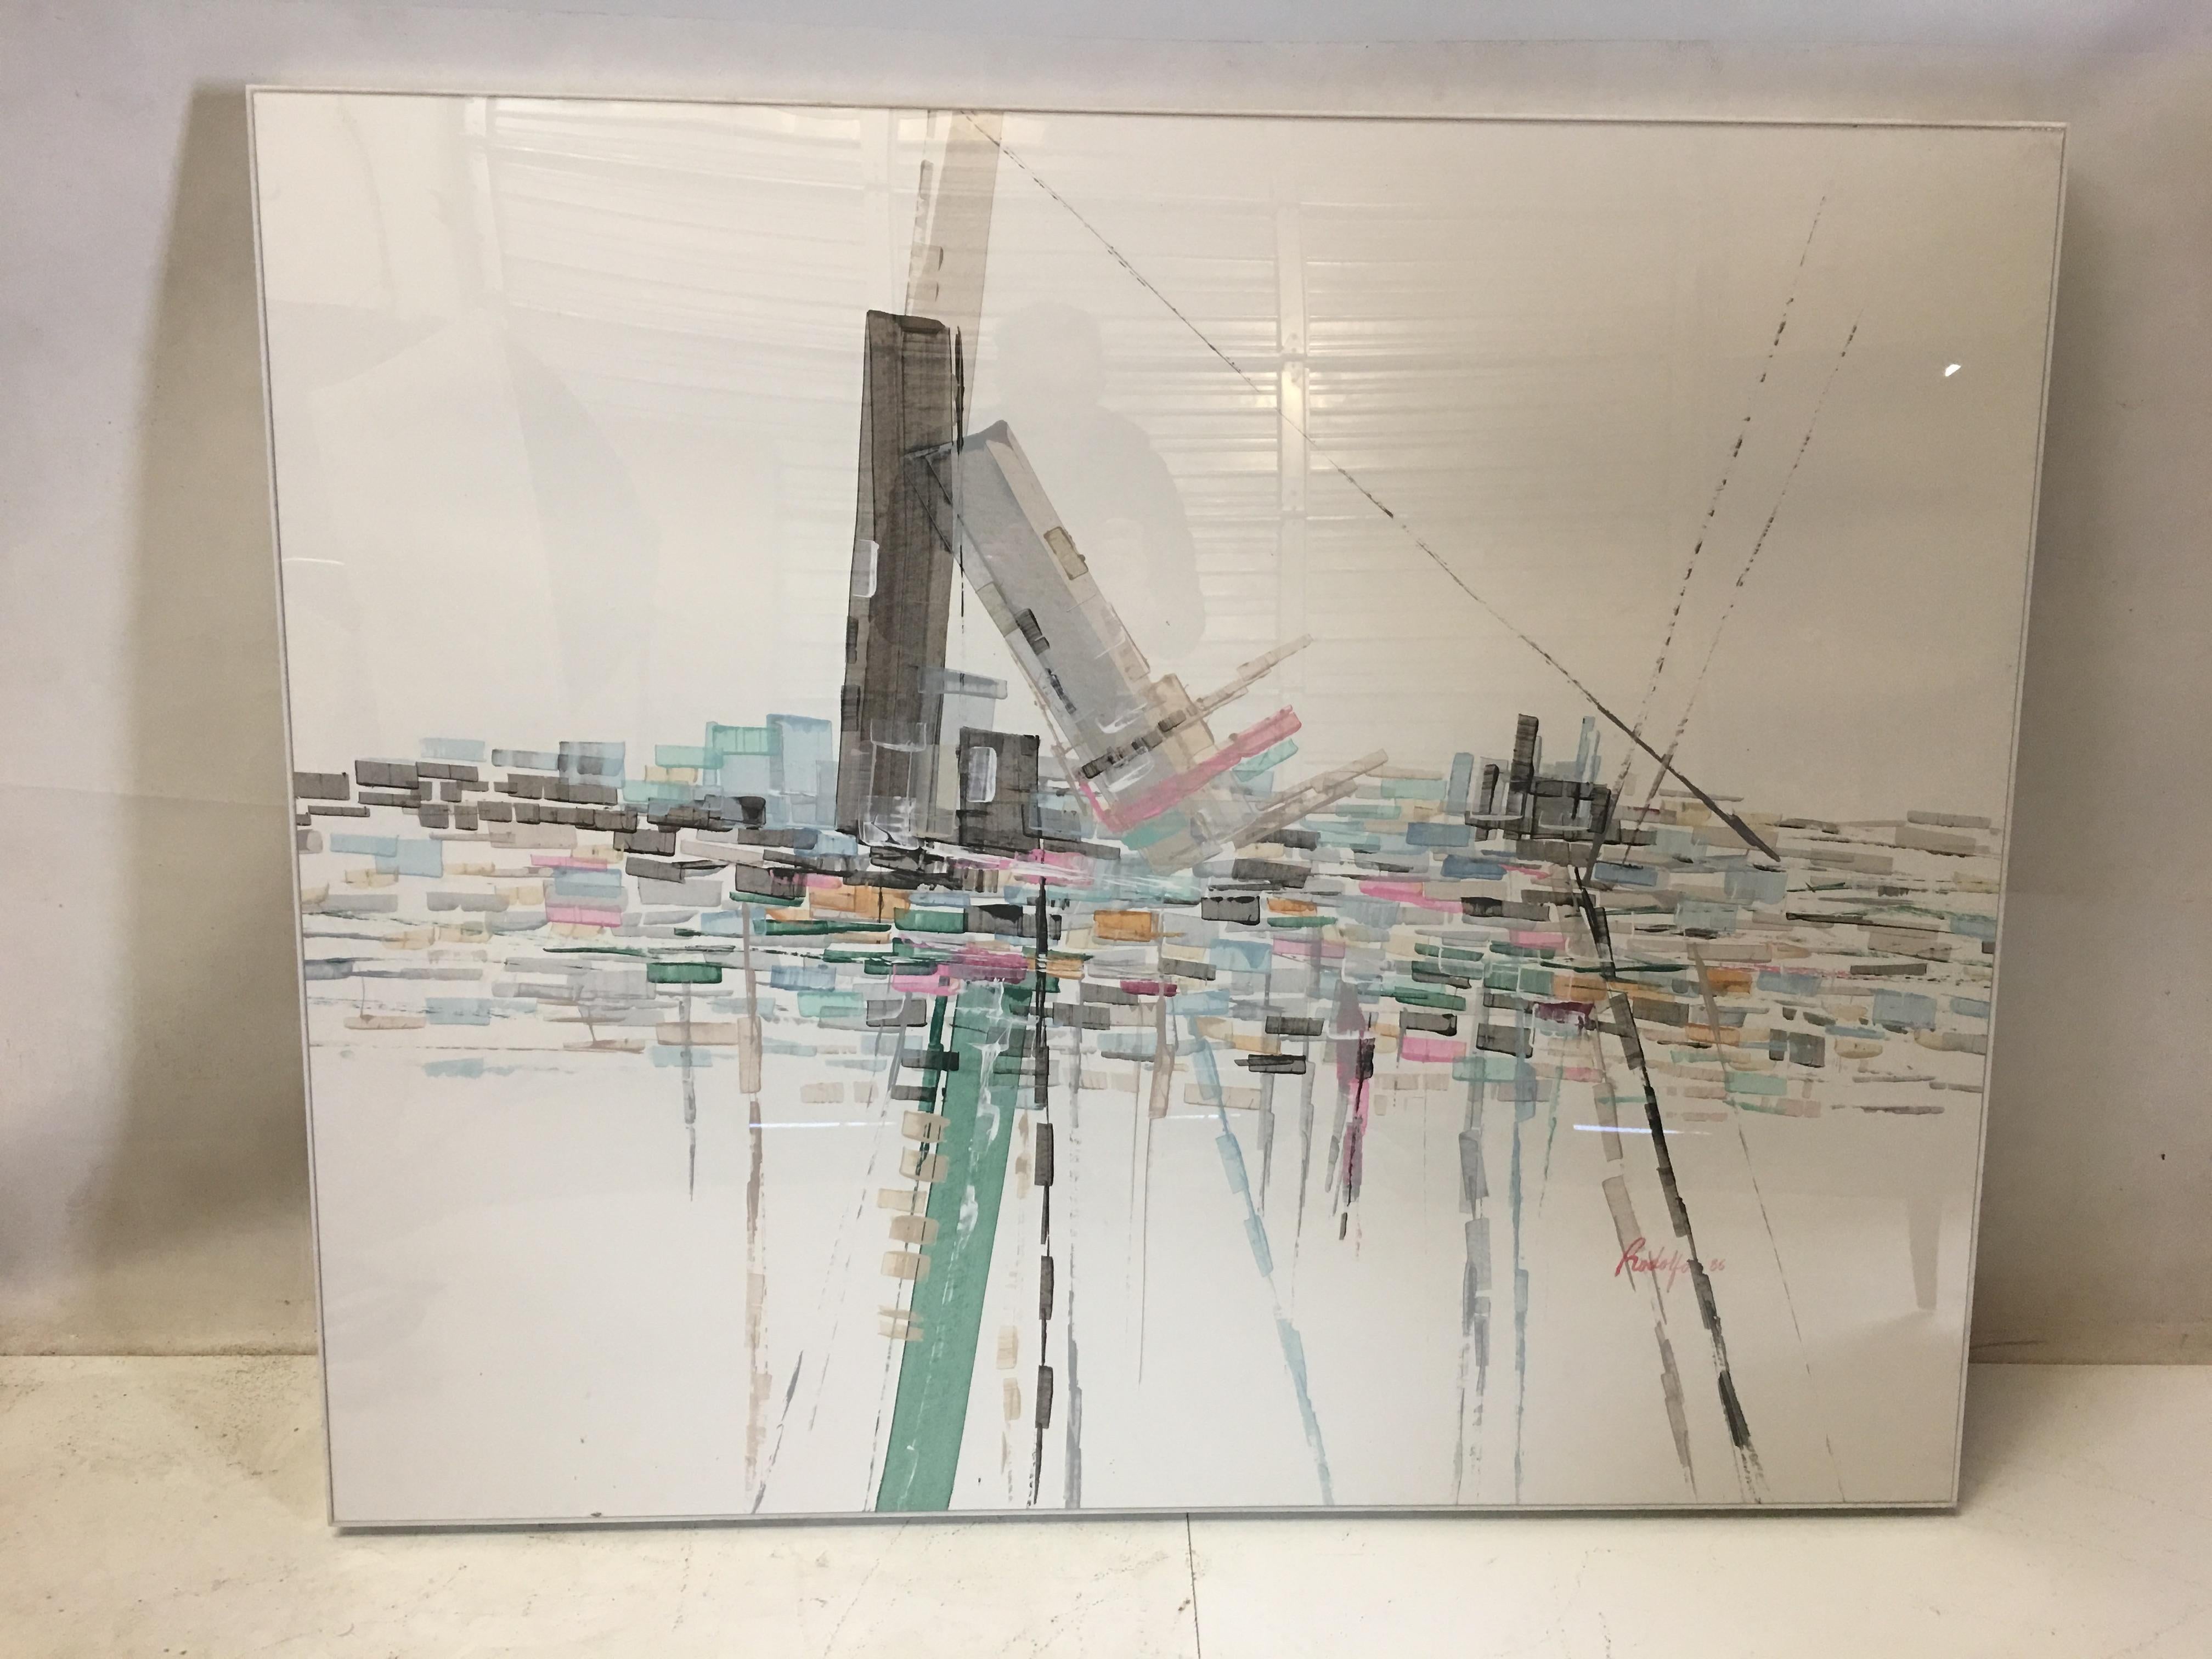 Beautiful watercolor abstract cityscape by Rodolfo, 1986. The work is beautifully framed in a white edged acrylic box-frame. Measures 48 x 40 x 2